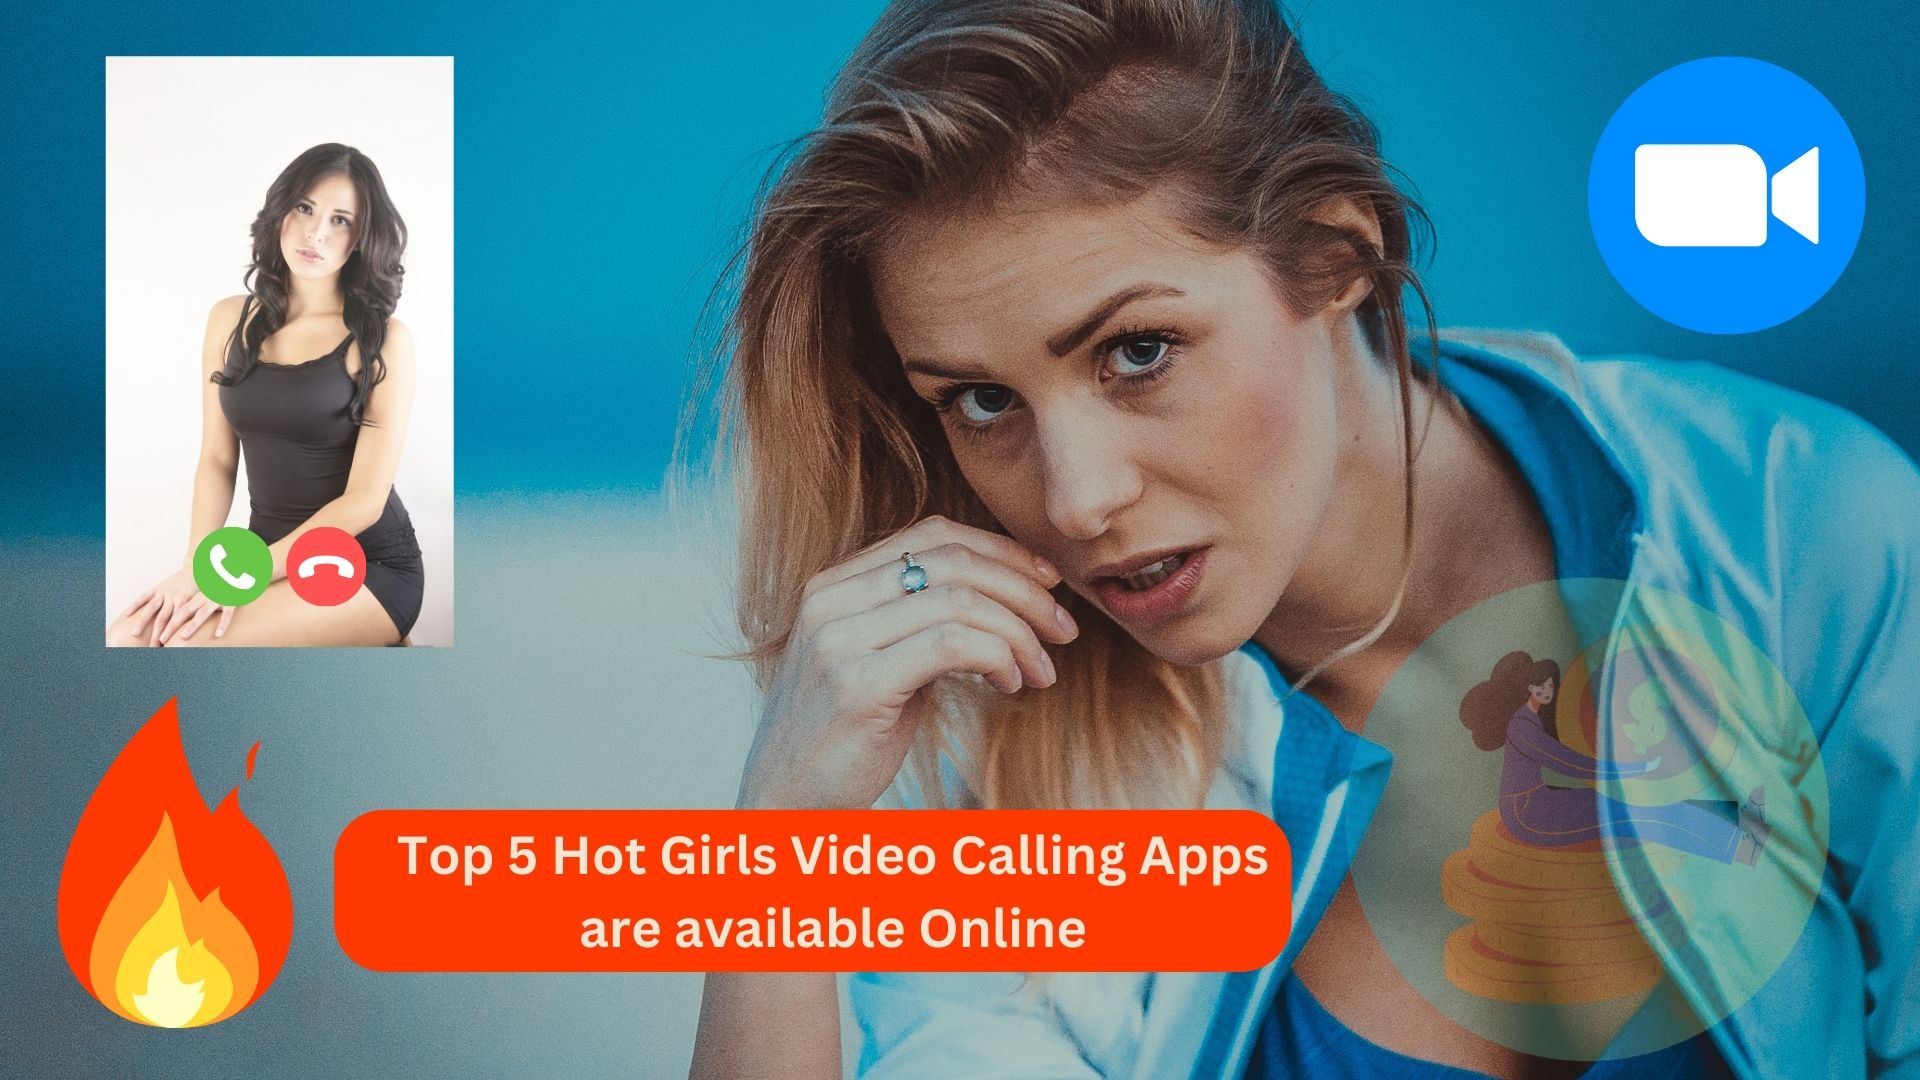 Top 5 Hot Girls Video Calling Apps are available Online